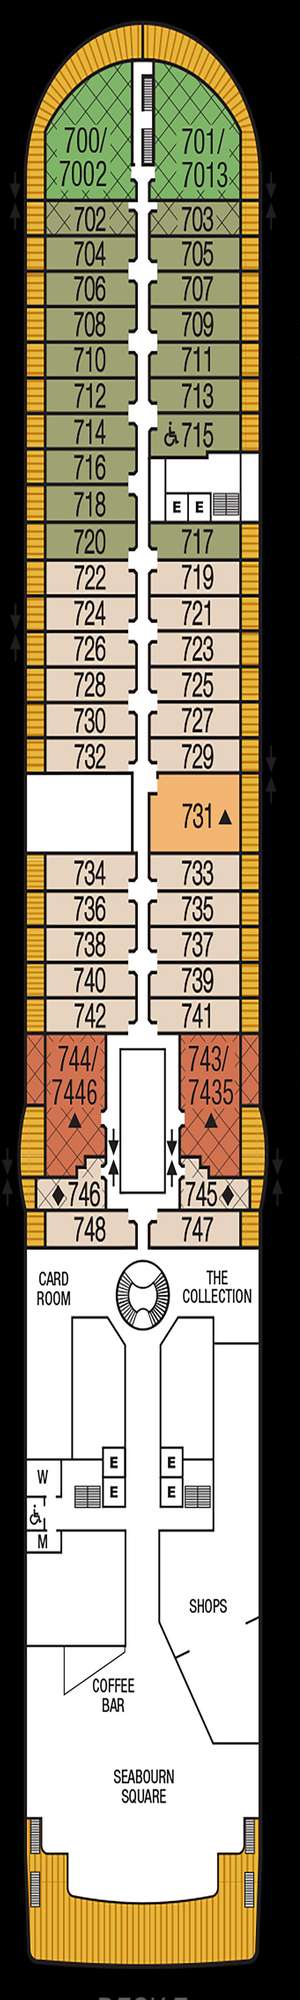 Deck plan for Seabourn Quest